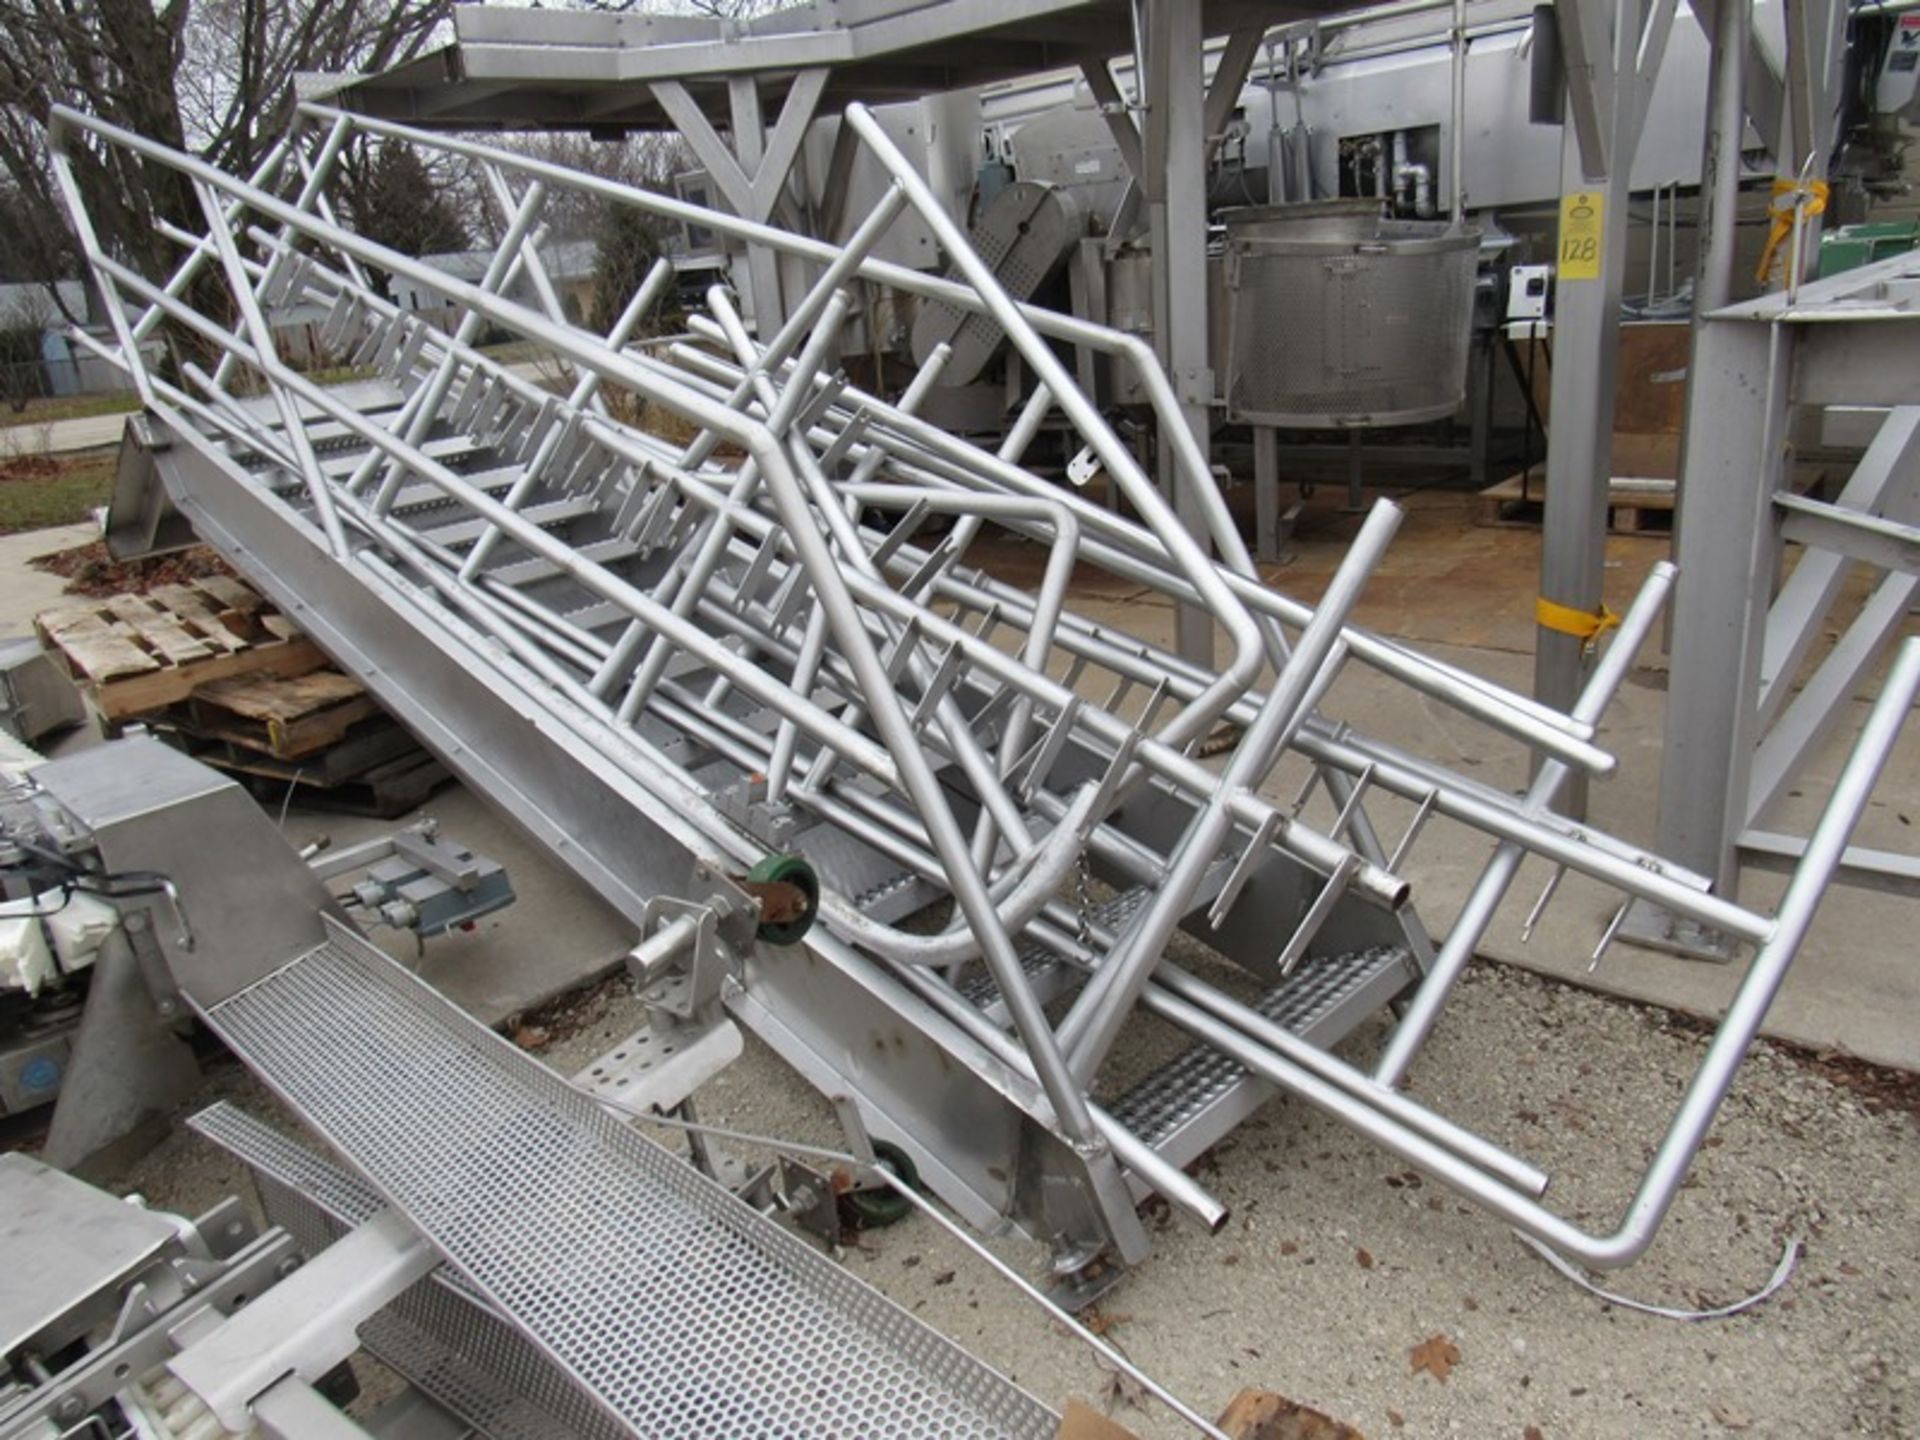 Stainless Steel Platform (partial) 7' W X 18' L X 89" Tall with stairs & railings - Image 2 of 2